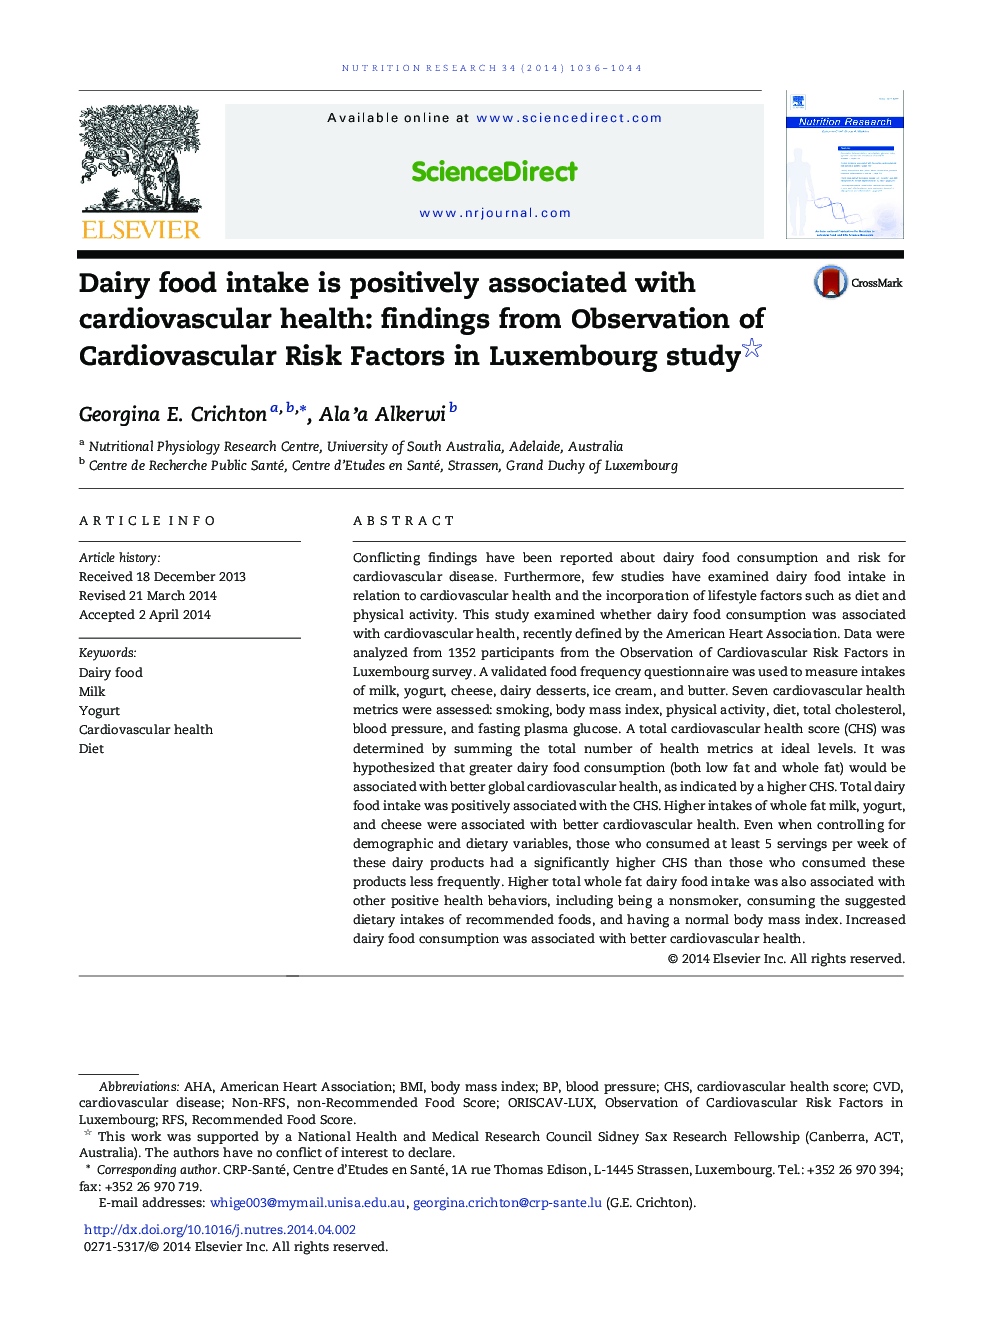 Dairy food intake is positively associated with cardiovascular health: findings from Observation of Cardiovascular Risk Factors in Luxembourg study 